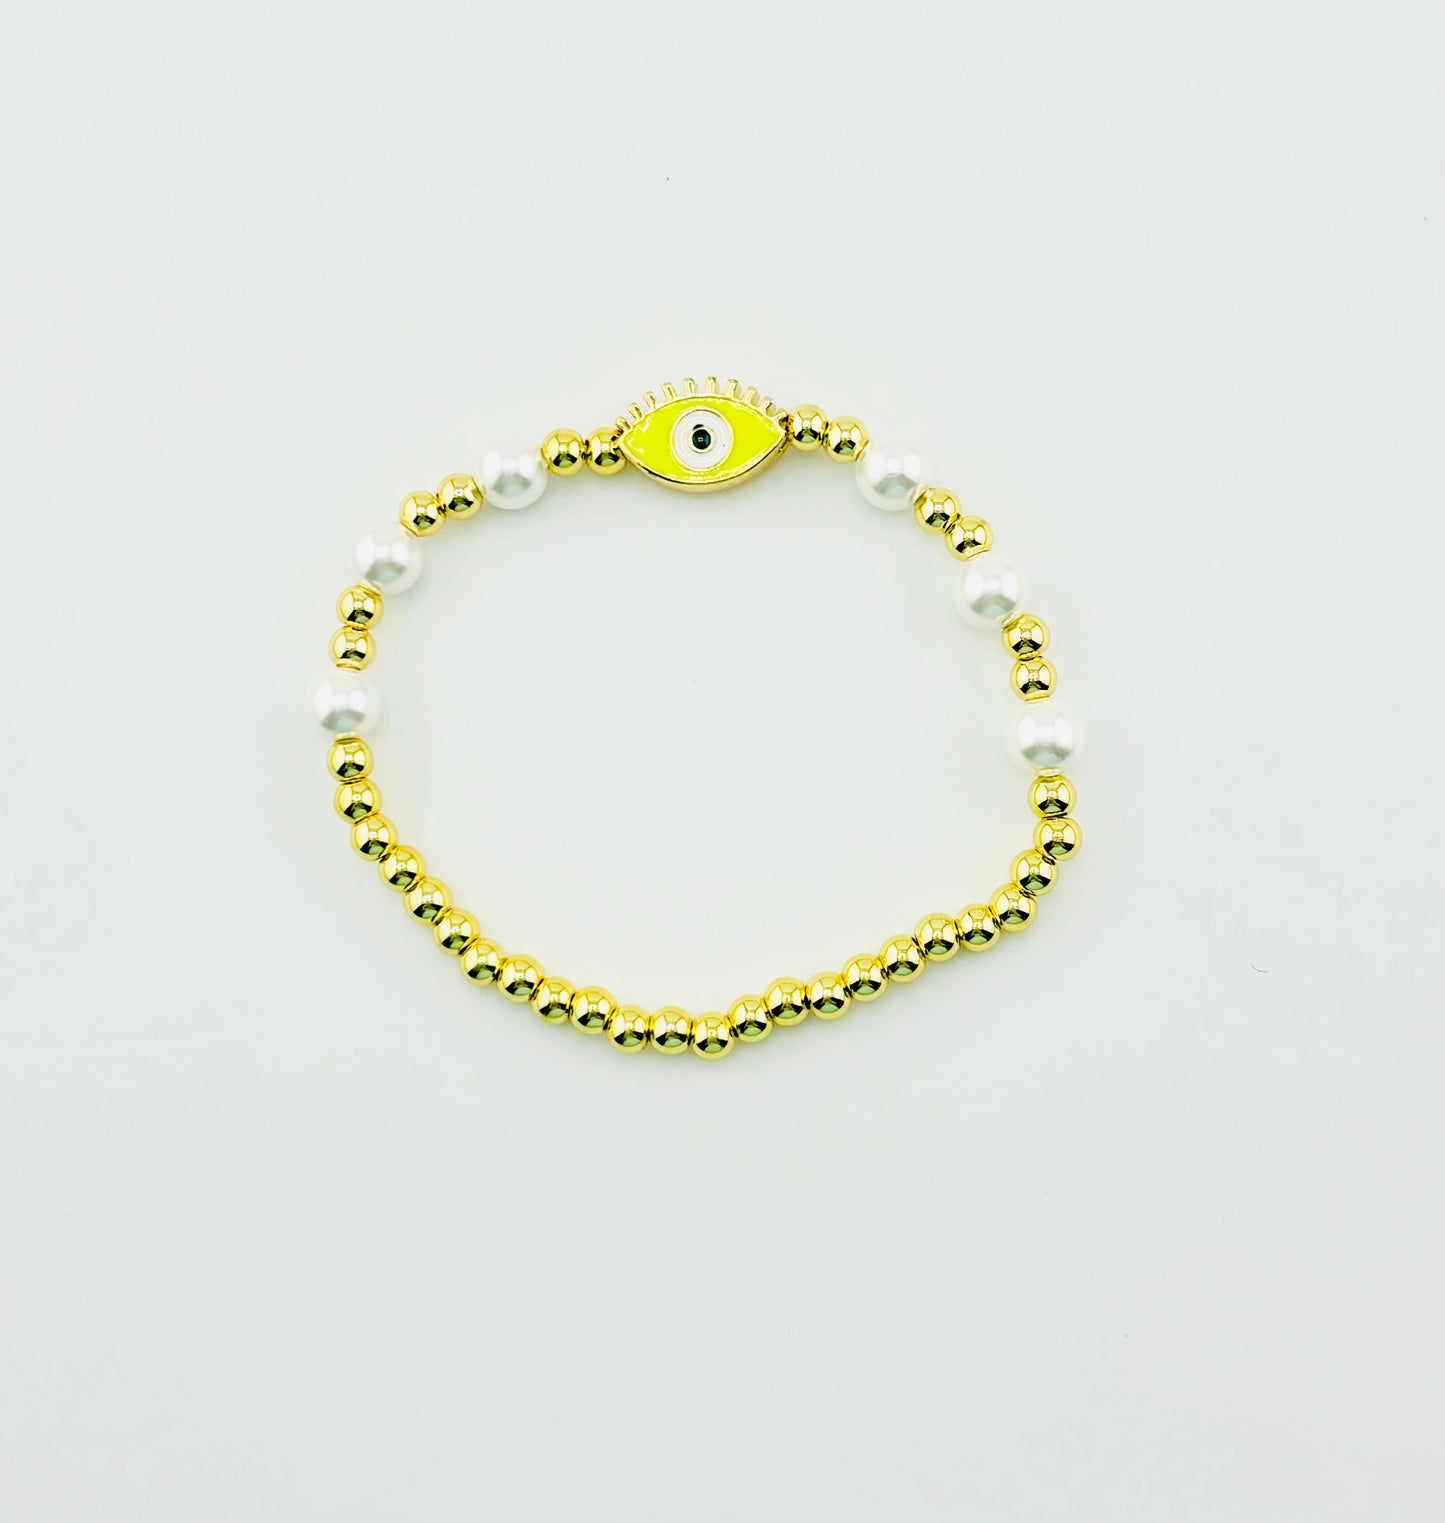 Yellow evil eye bracelet with gold filled